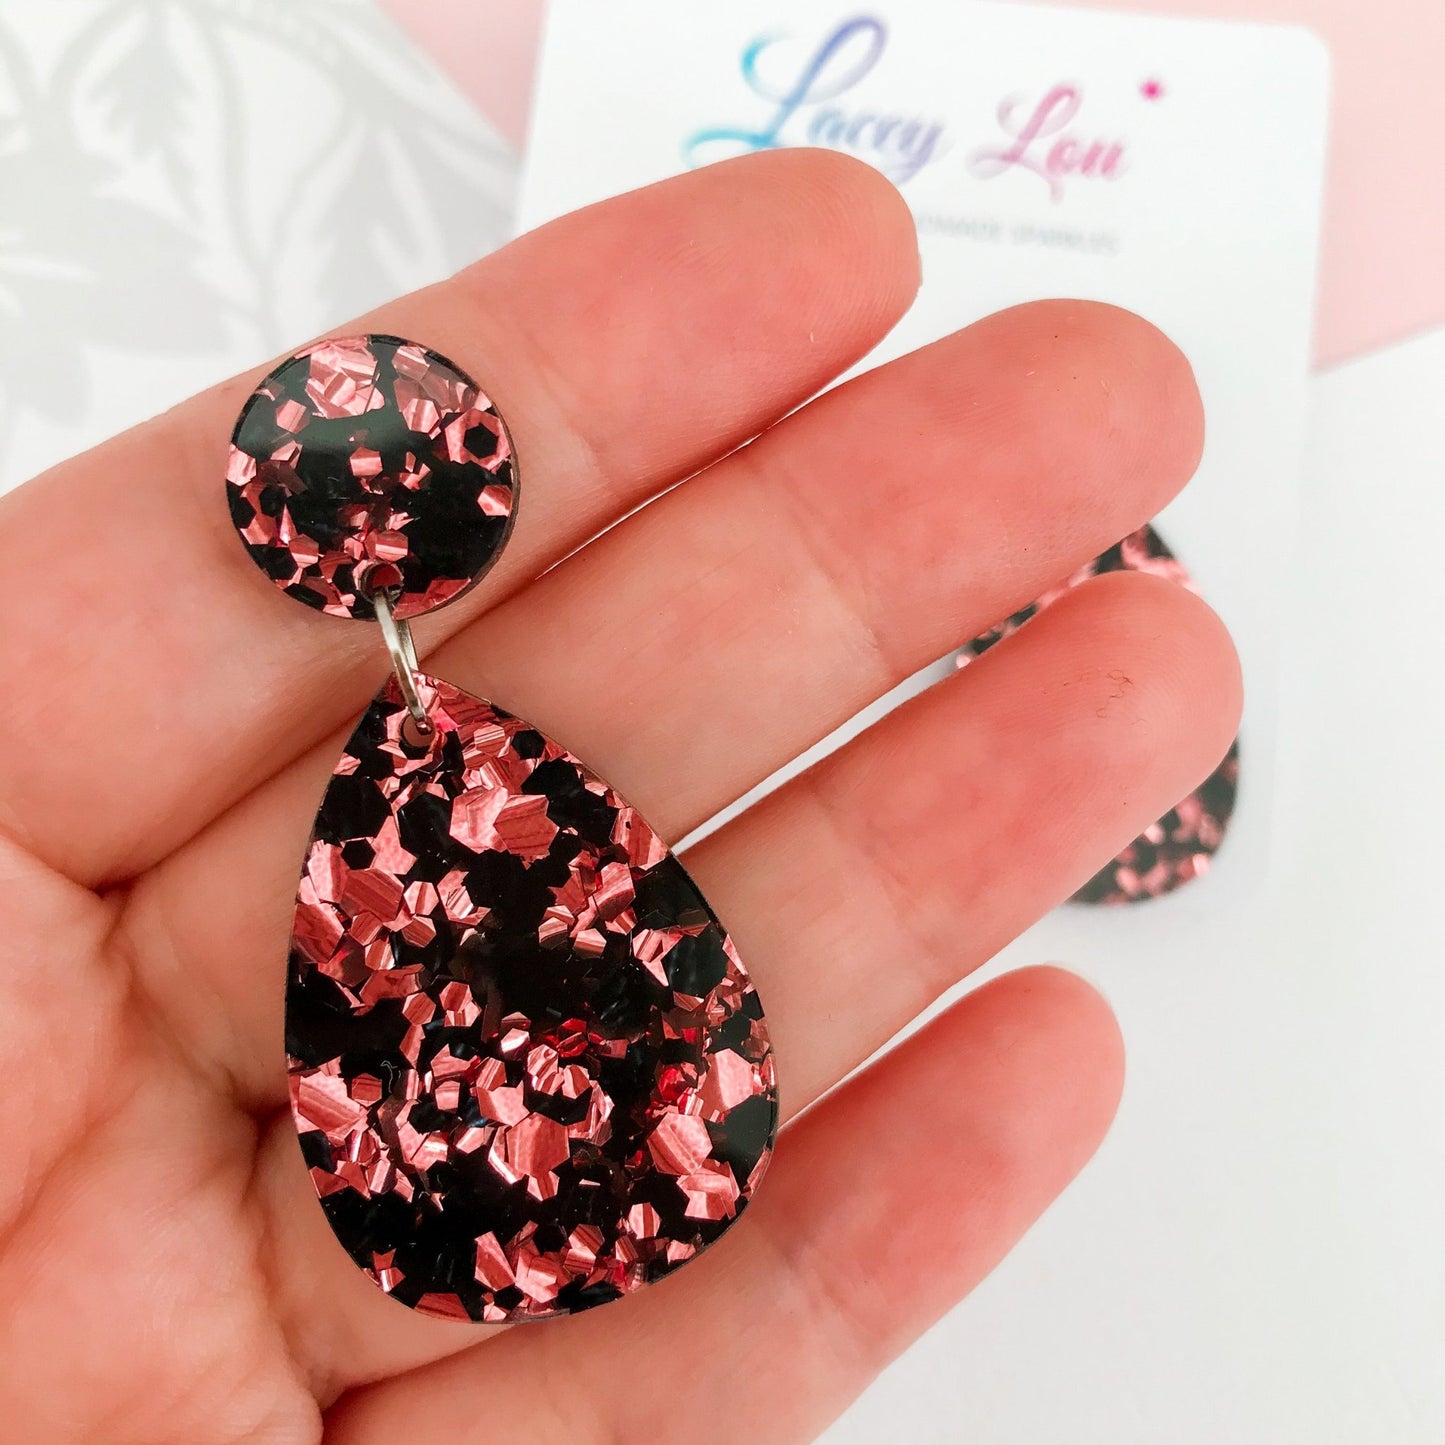 Medium Teardrop Dangle - Rose Gold and Black Glitter Acrylic Earring - Lacey Lou Sparkles